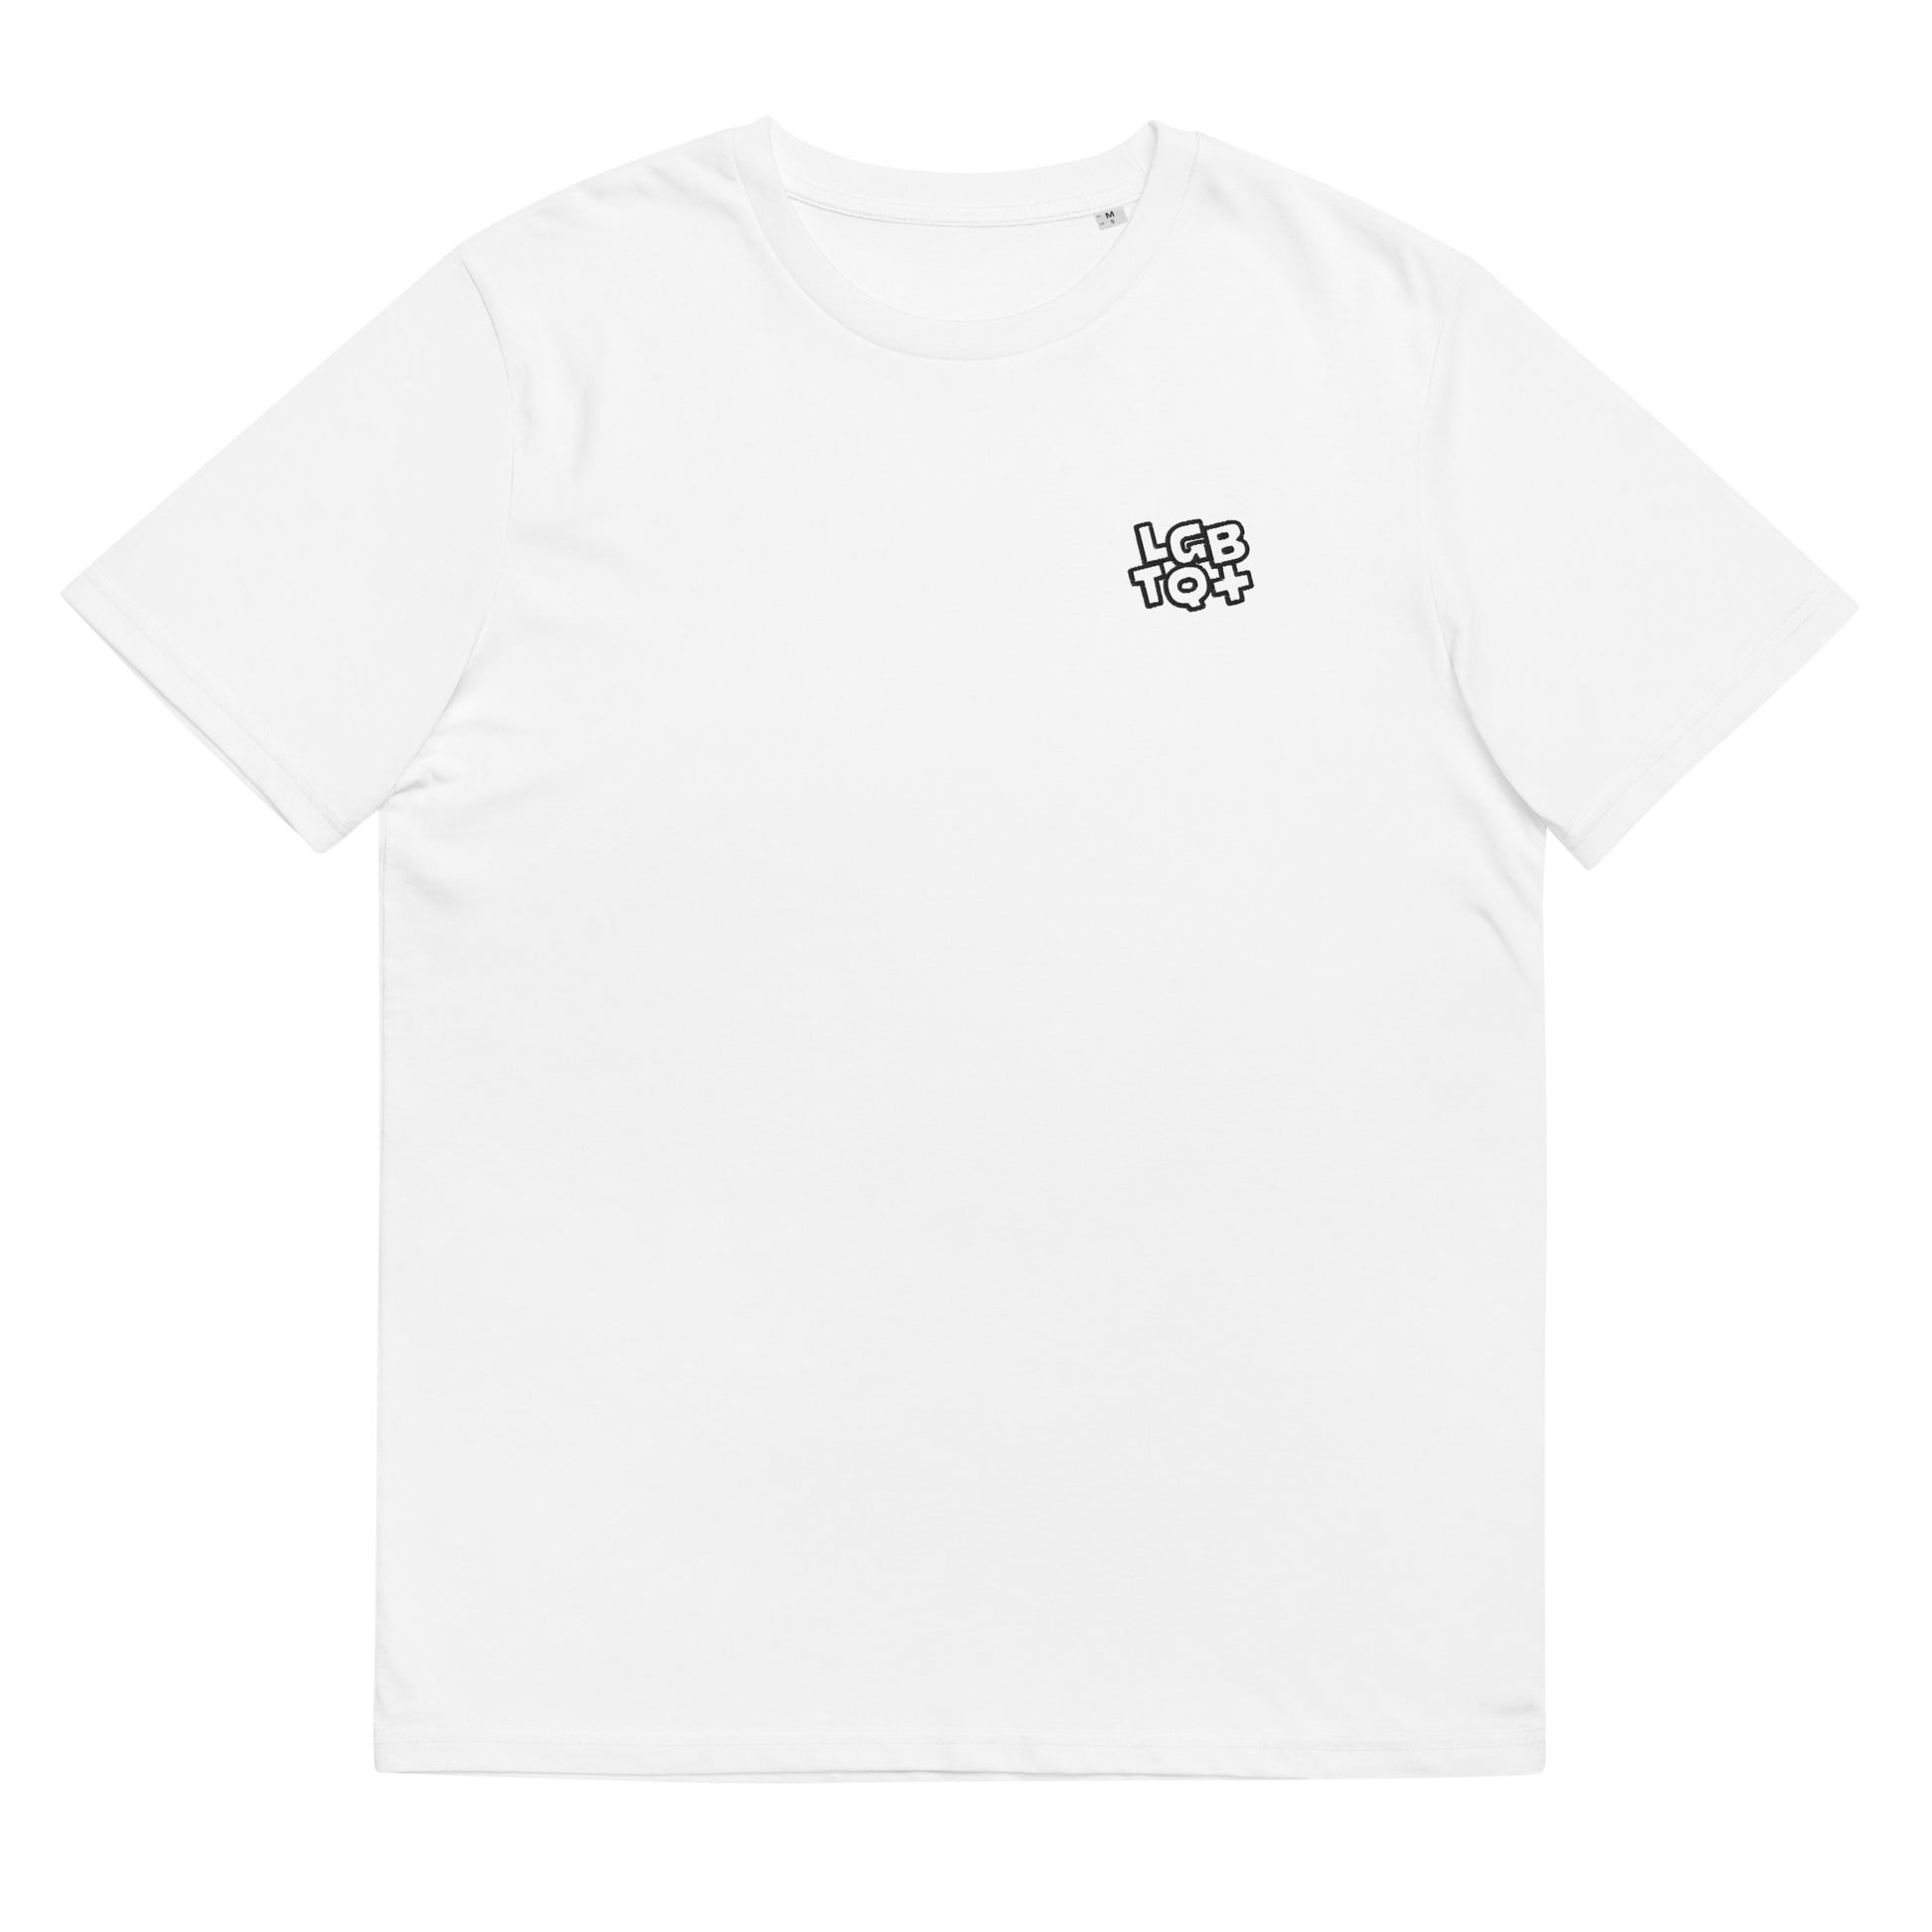 Fitted white organic cotton t-shirt with a small embroidered LGBTQ+ design on the left chest. Available in sizes S to 3XL.